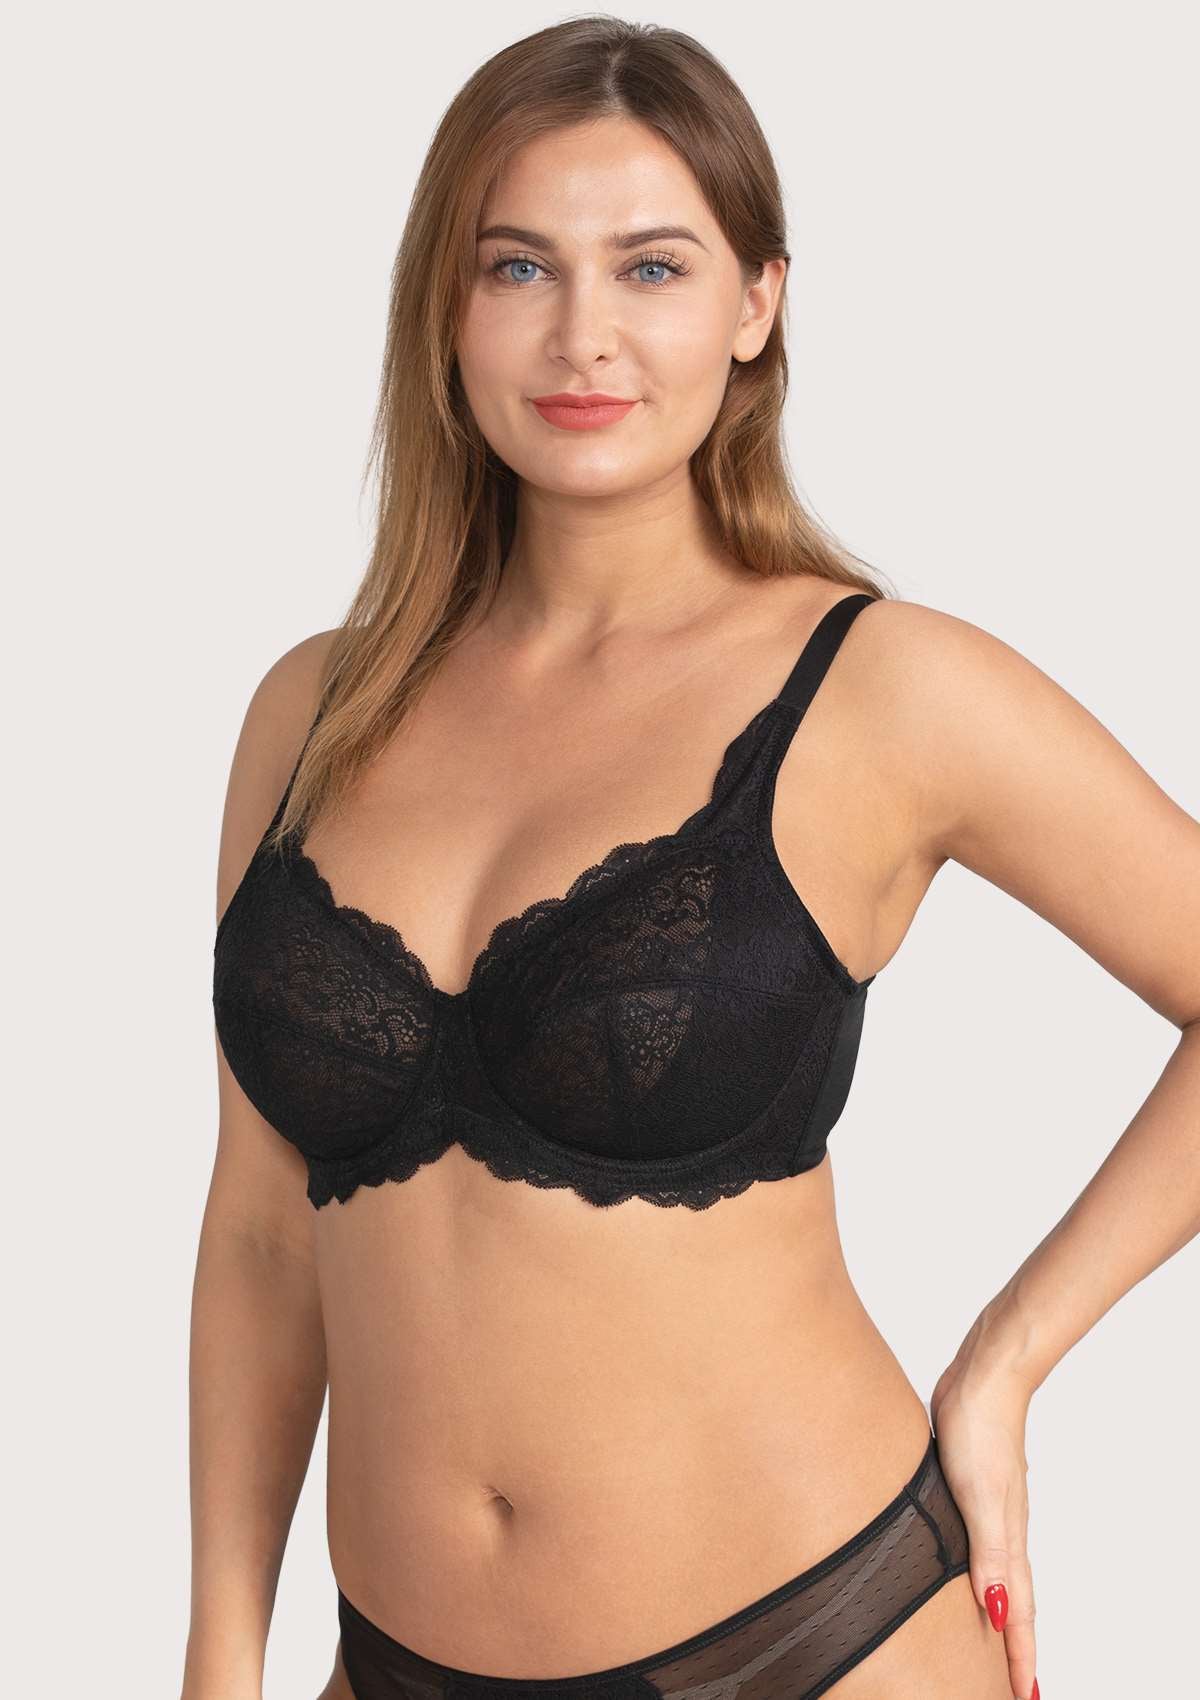 HSIA All-Over Floral Lace Unlined Bra: Minimizer Bra For Heavy Breasts - Black / 36 / D